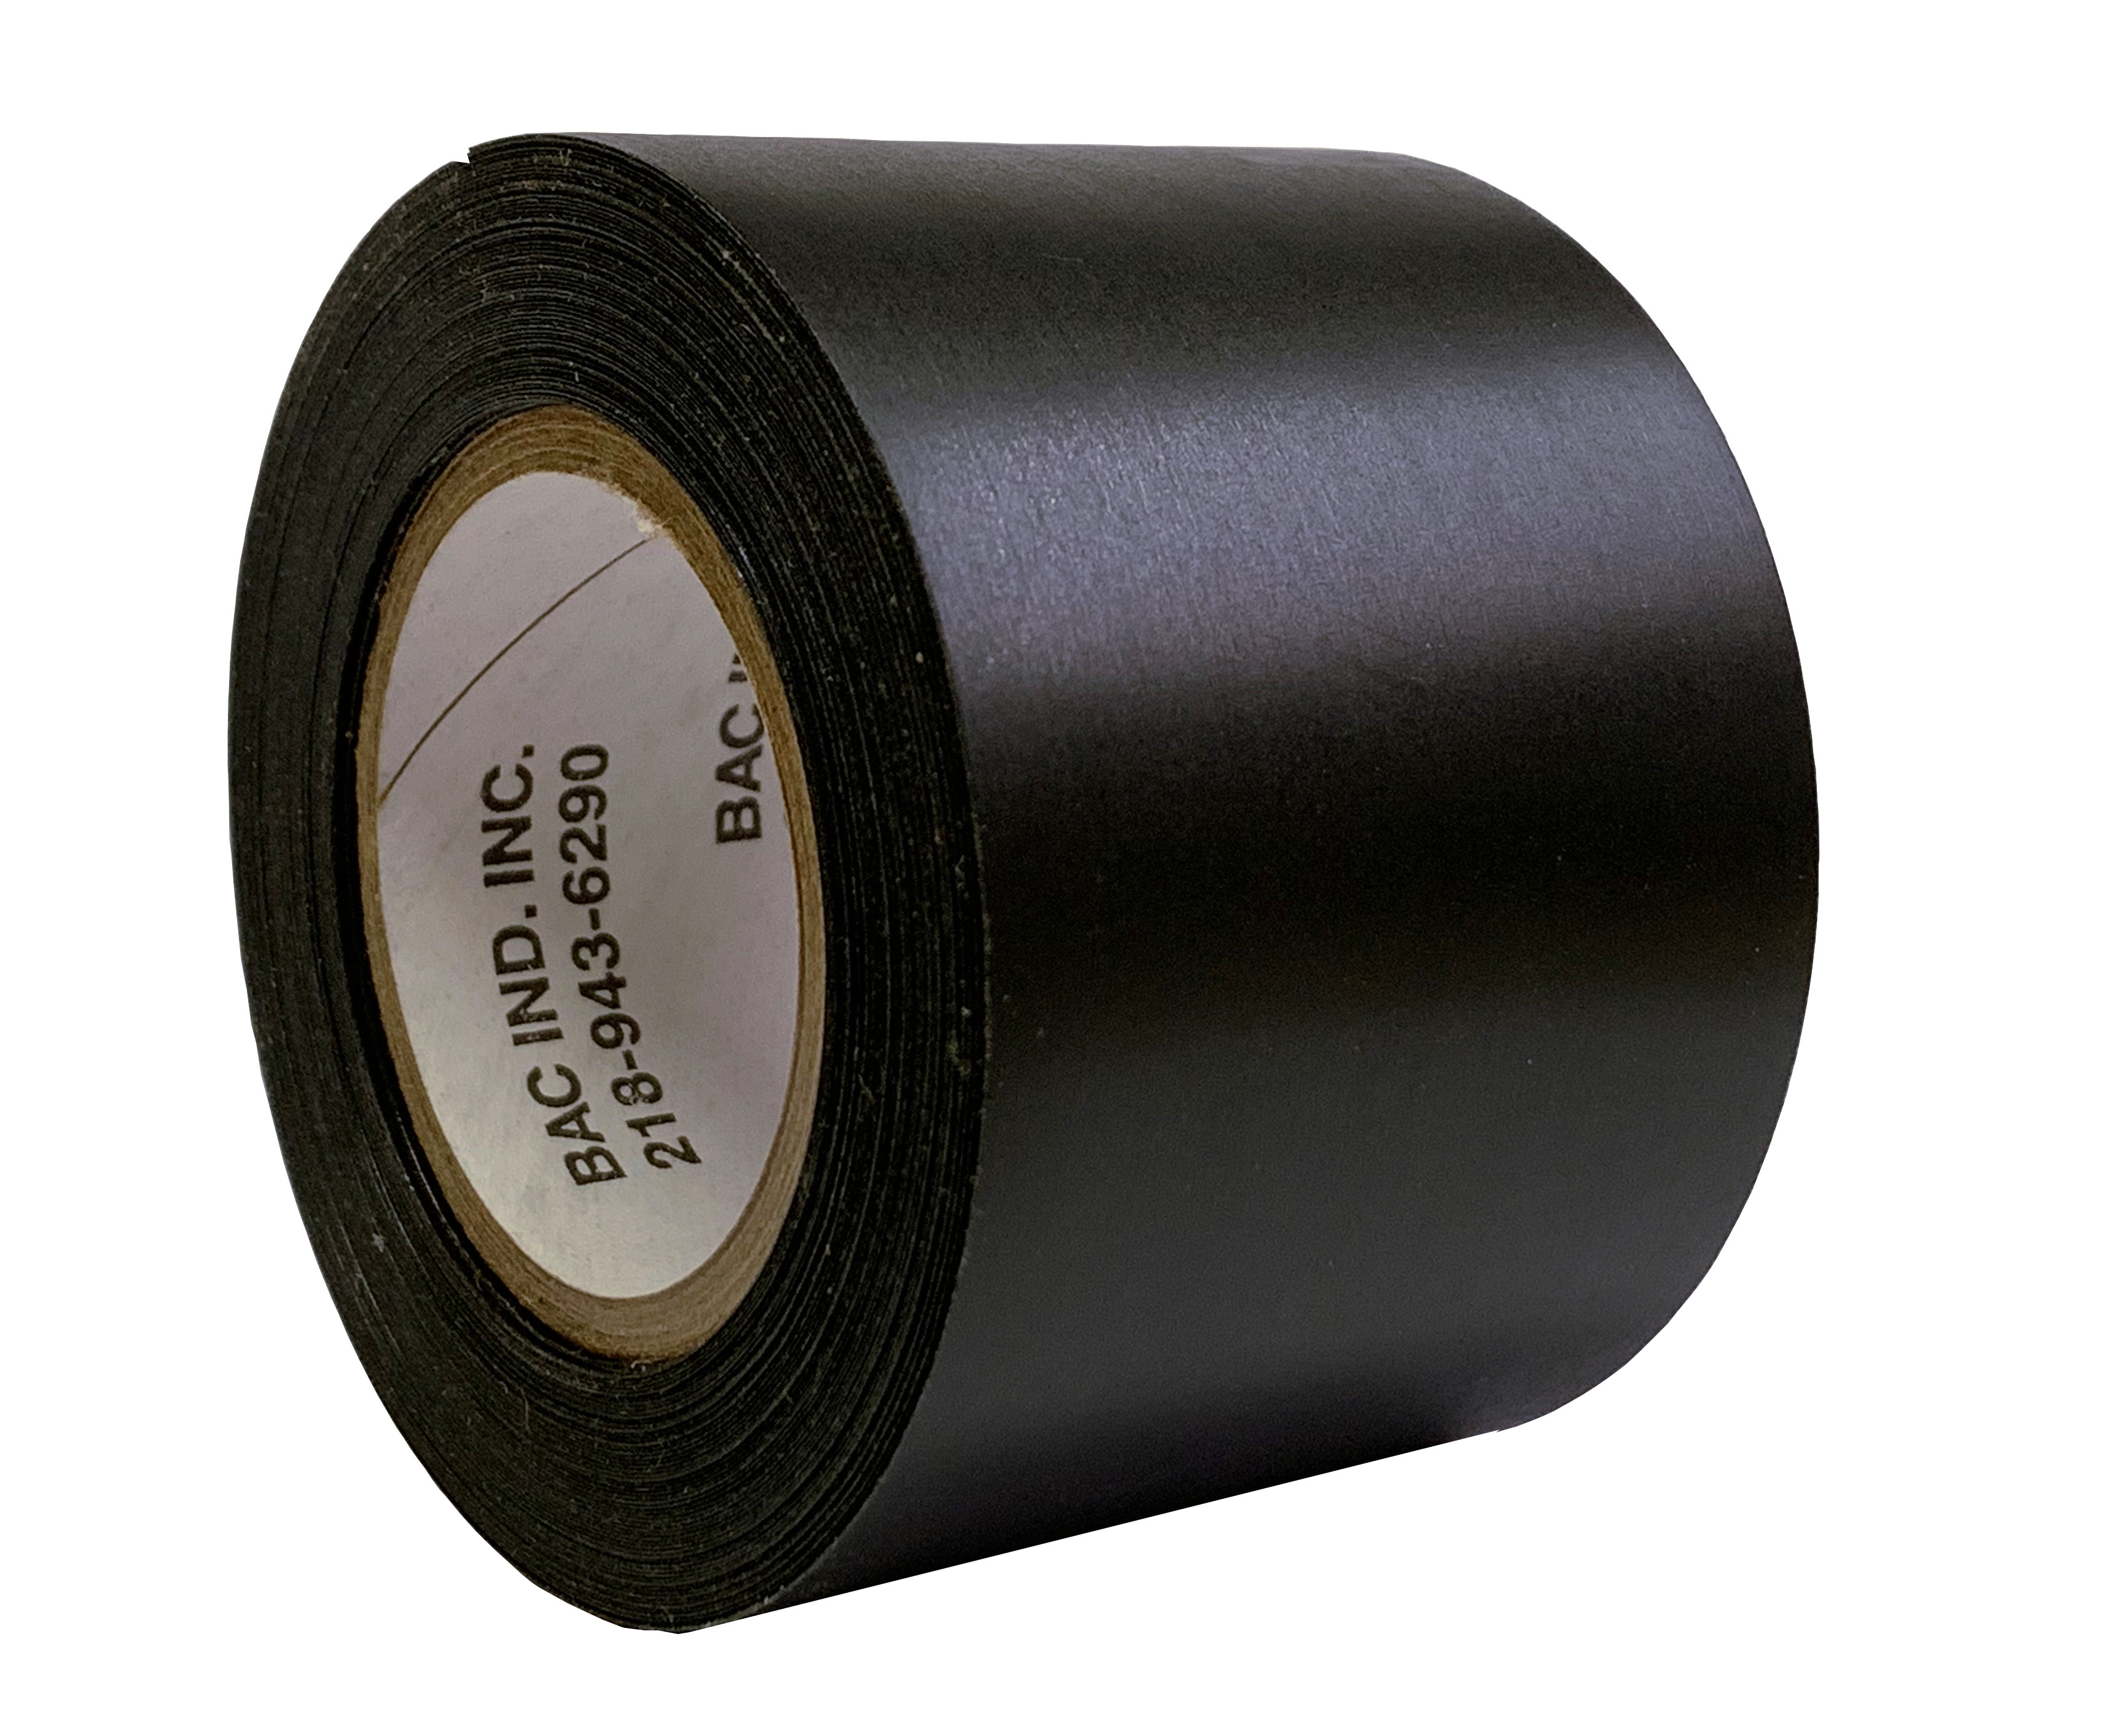 Black Tarp Tape - 2 Inch Wide x 35 Foot Roll - image 1 of 1